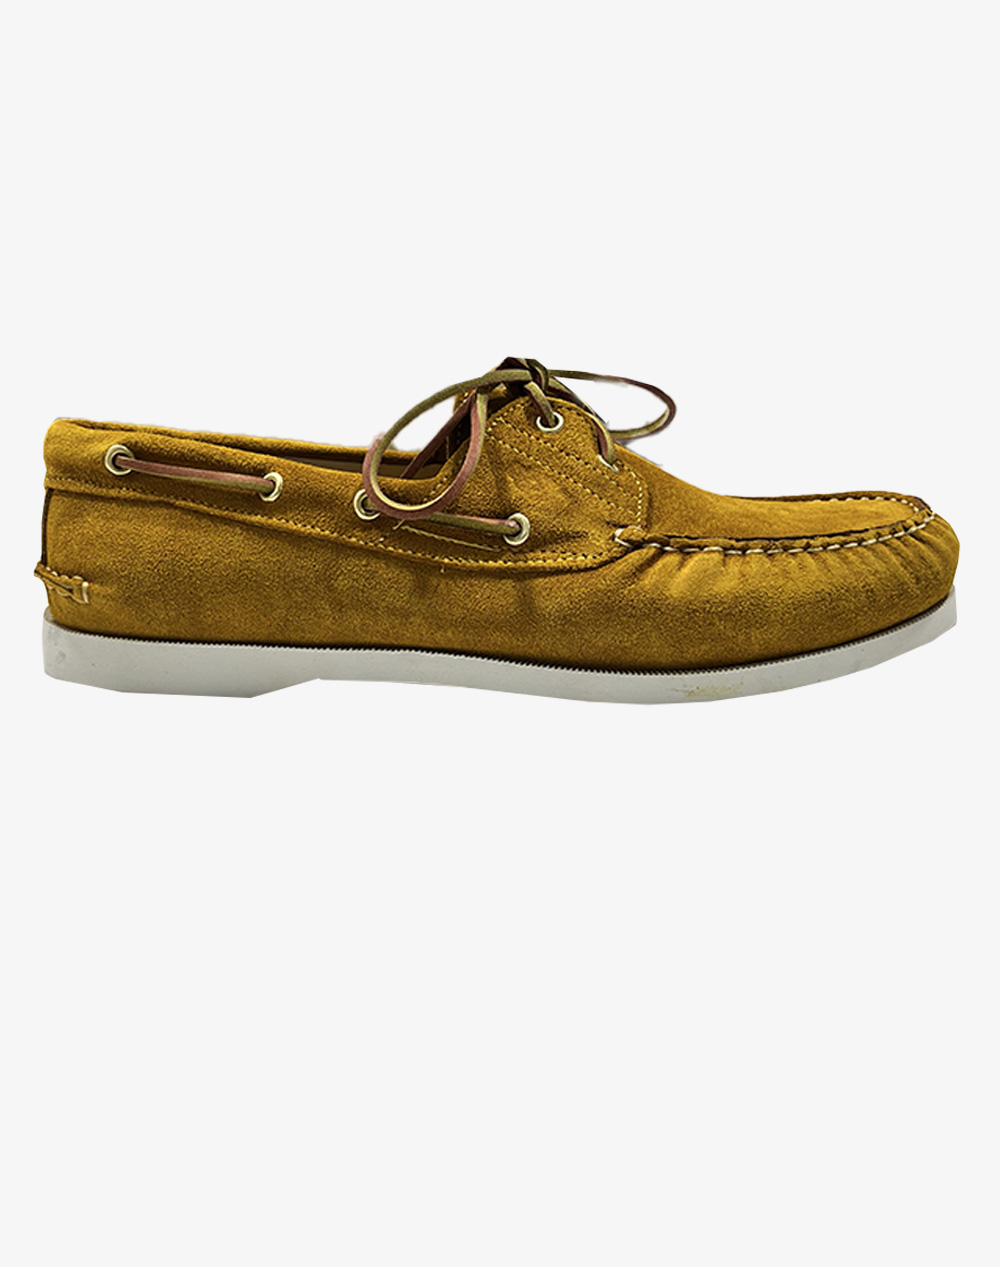 CHICAGO SHOES 124-5.0947-820-GOLD SUEDE Mustard